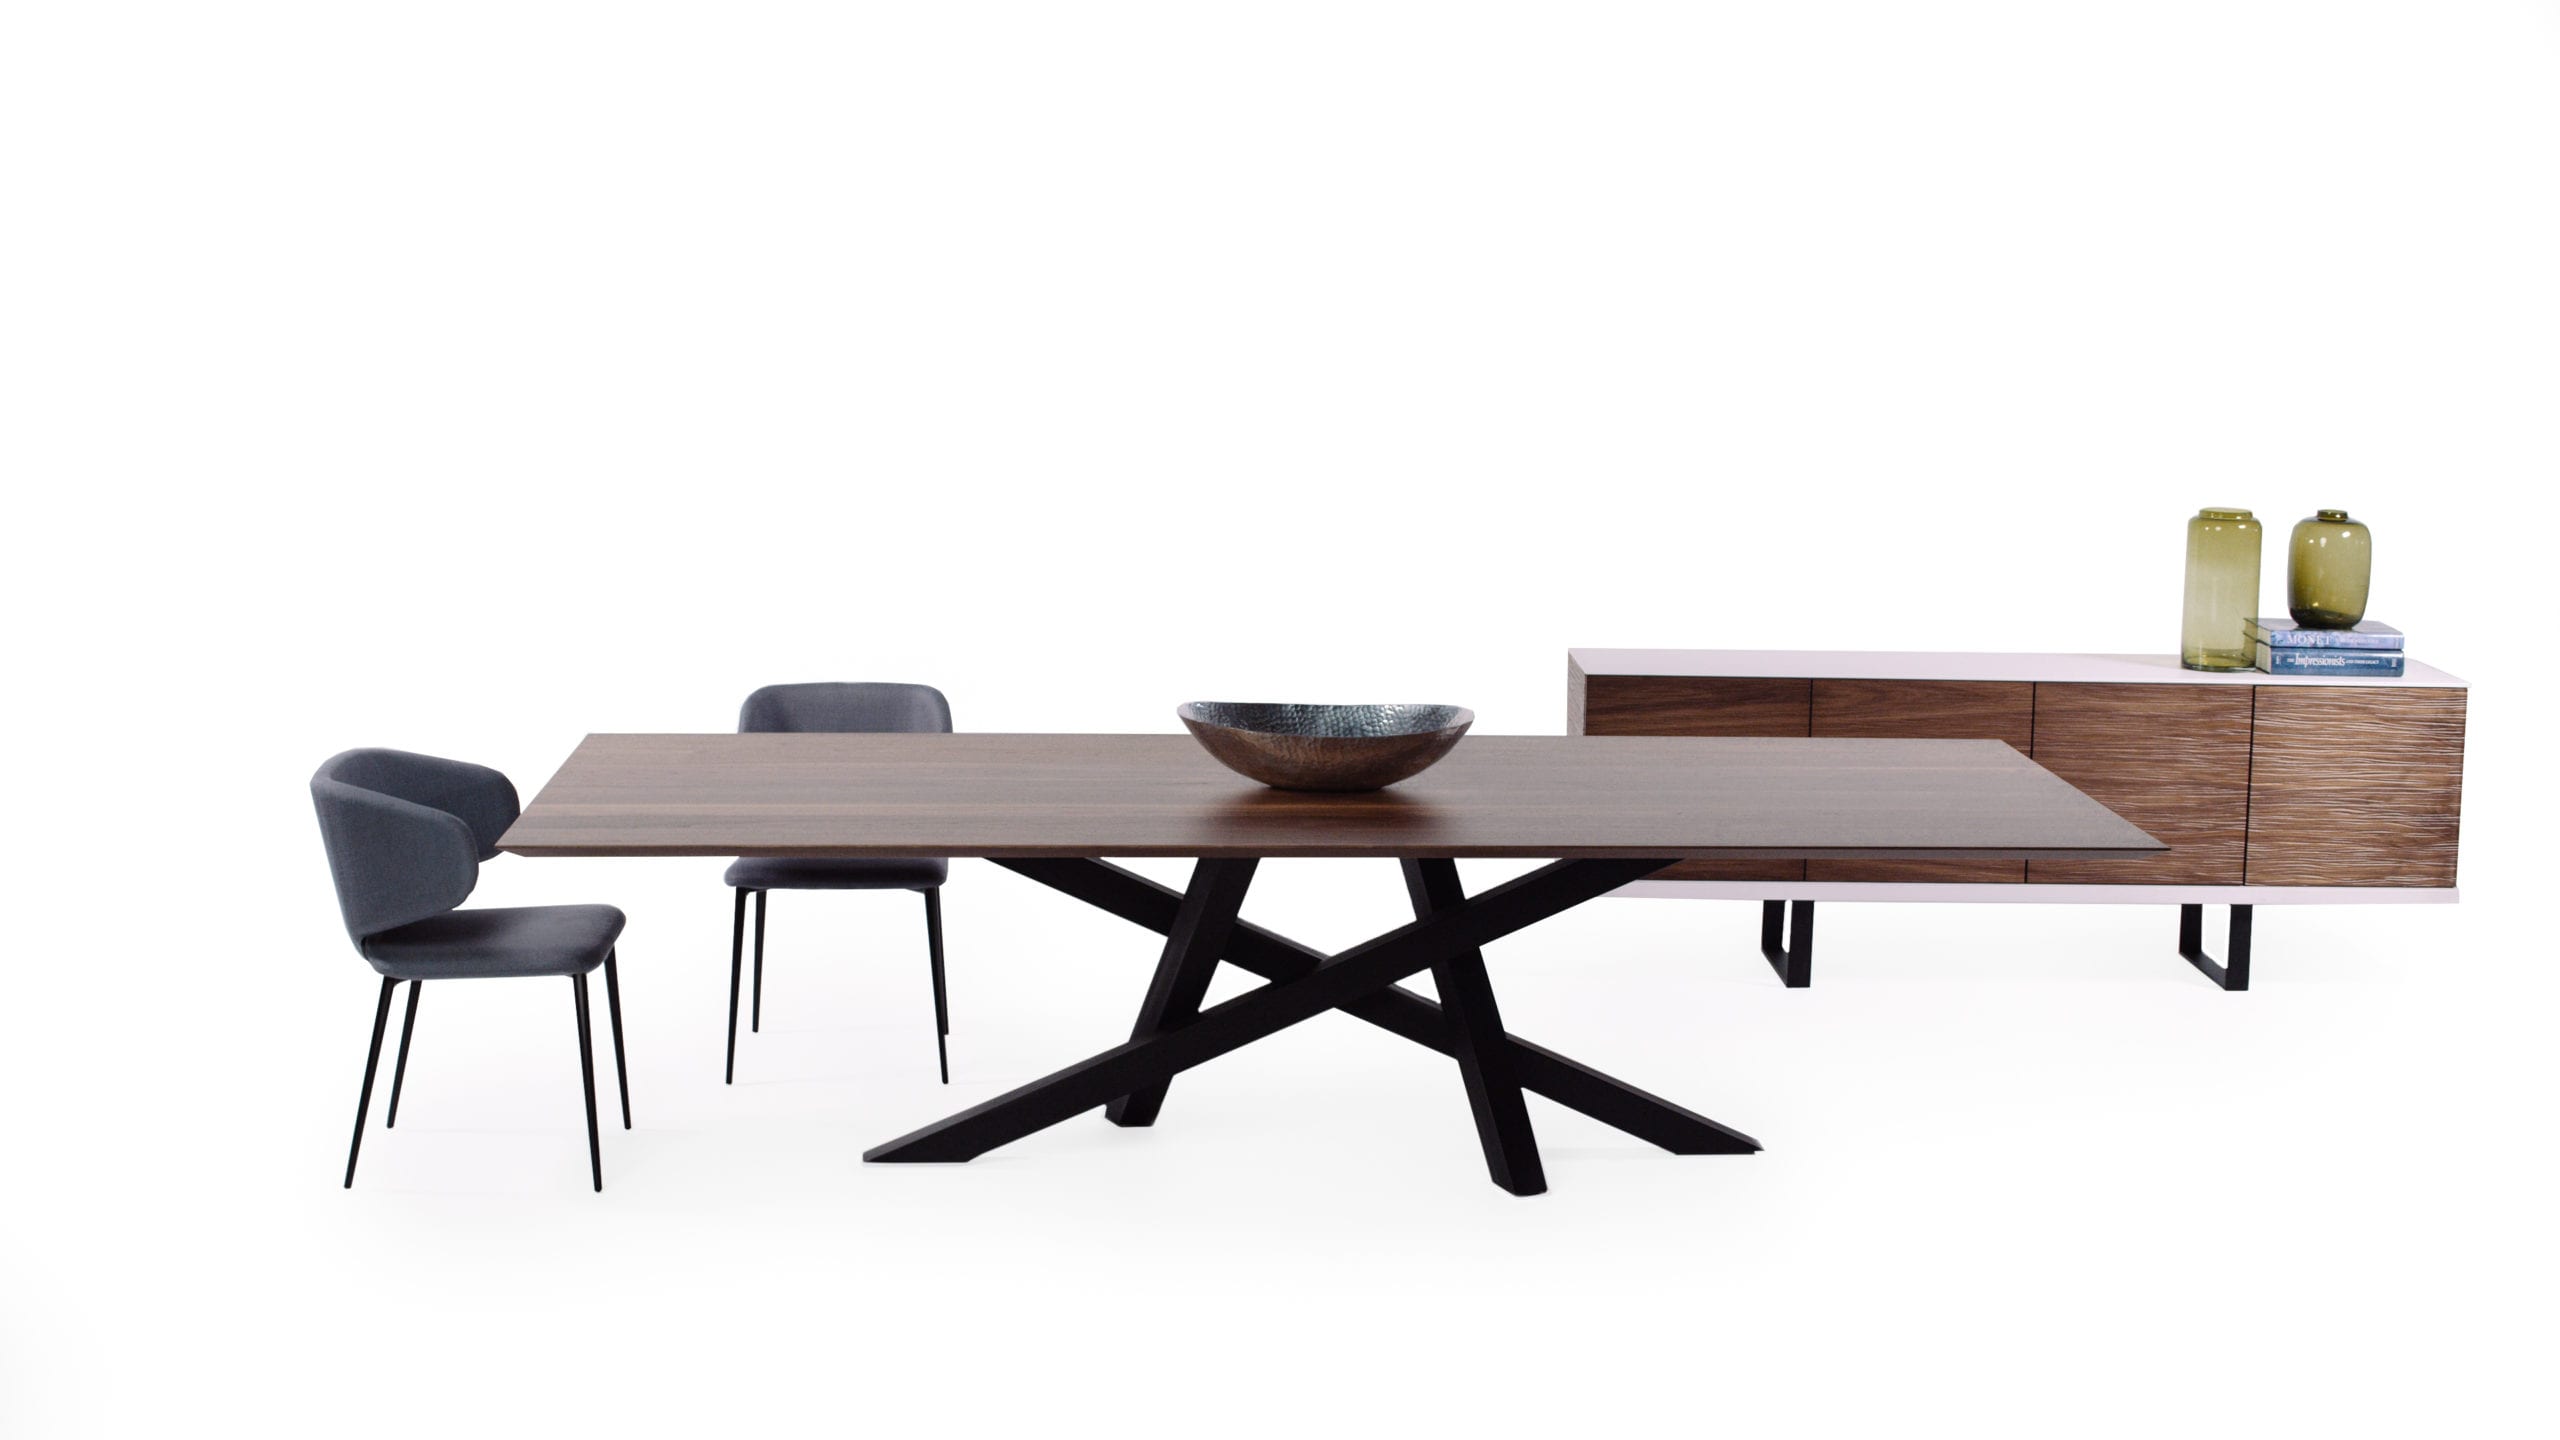 Yiannis Proofs Wooden table with black legs on display with gray chairs and wooden cabinet